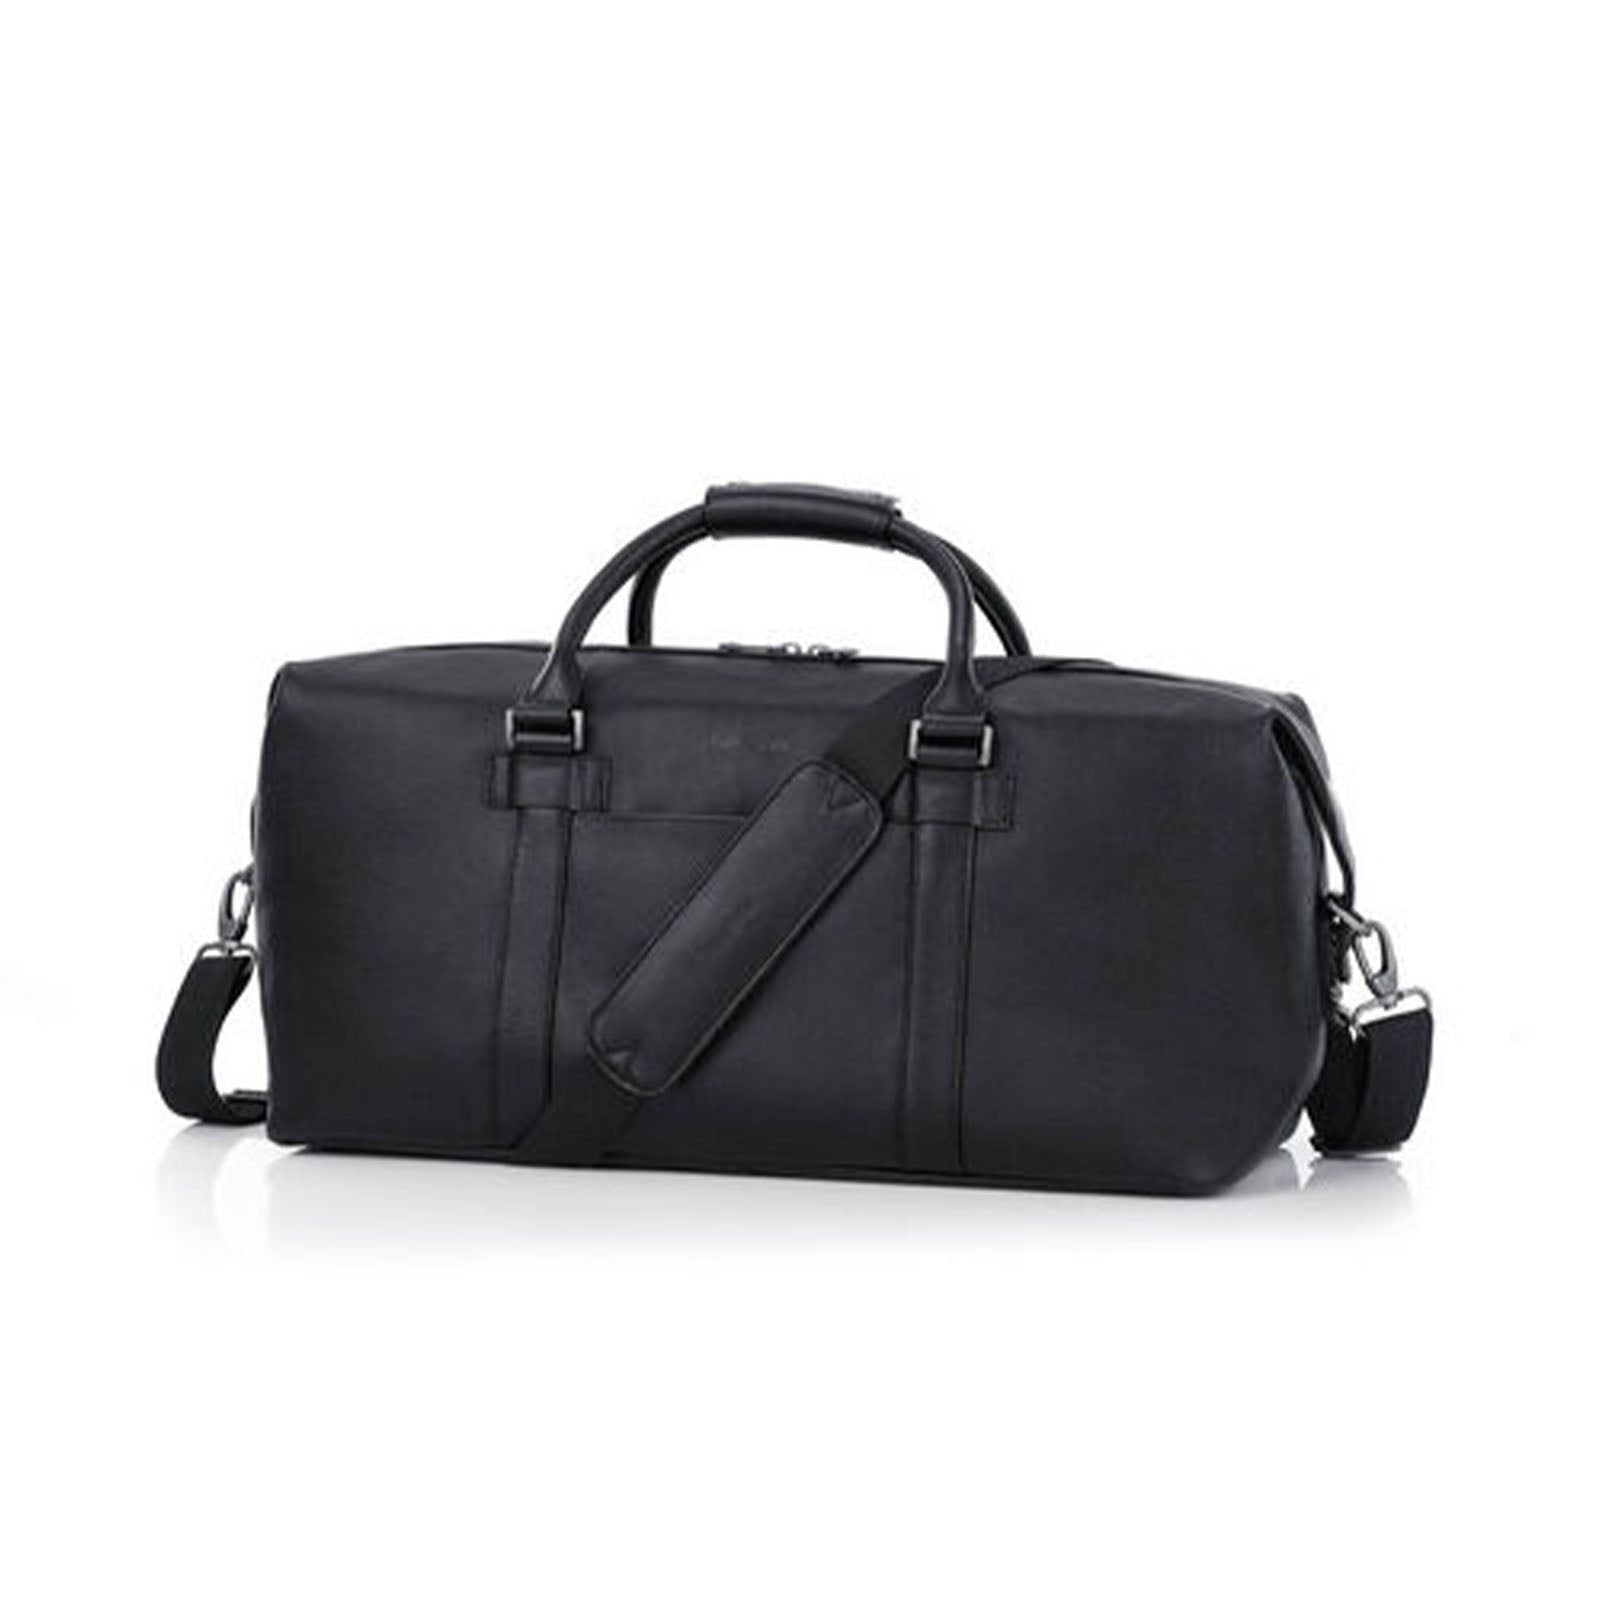 Samsonite-Classic-Leather-Carry-On-Duffle-Black-Shoulder-Strap